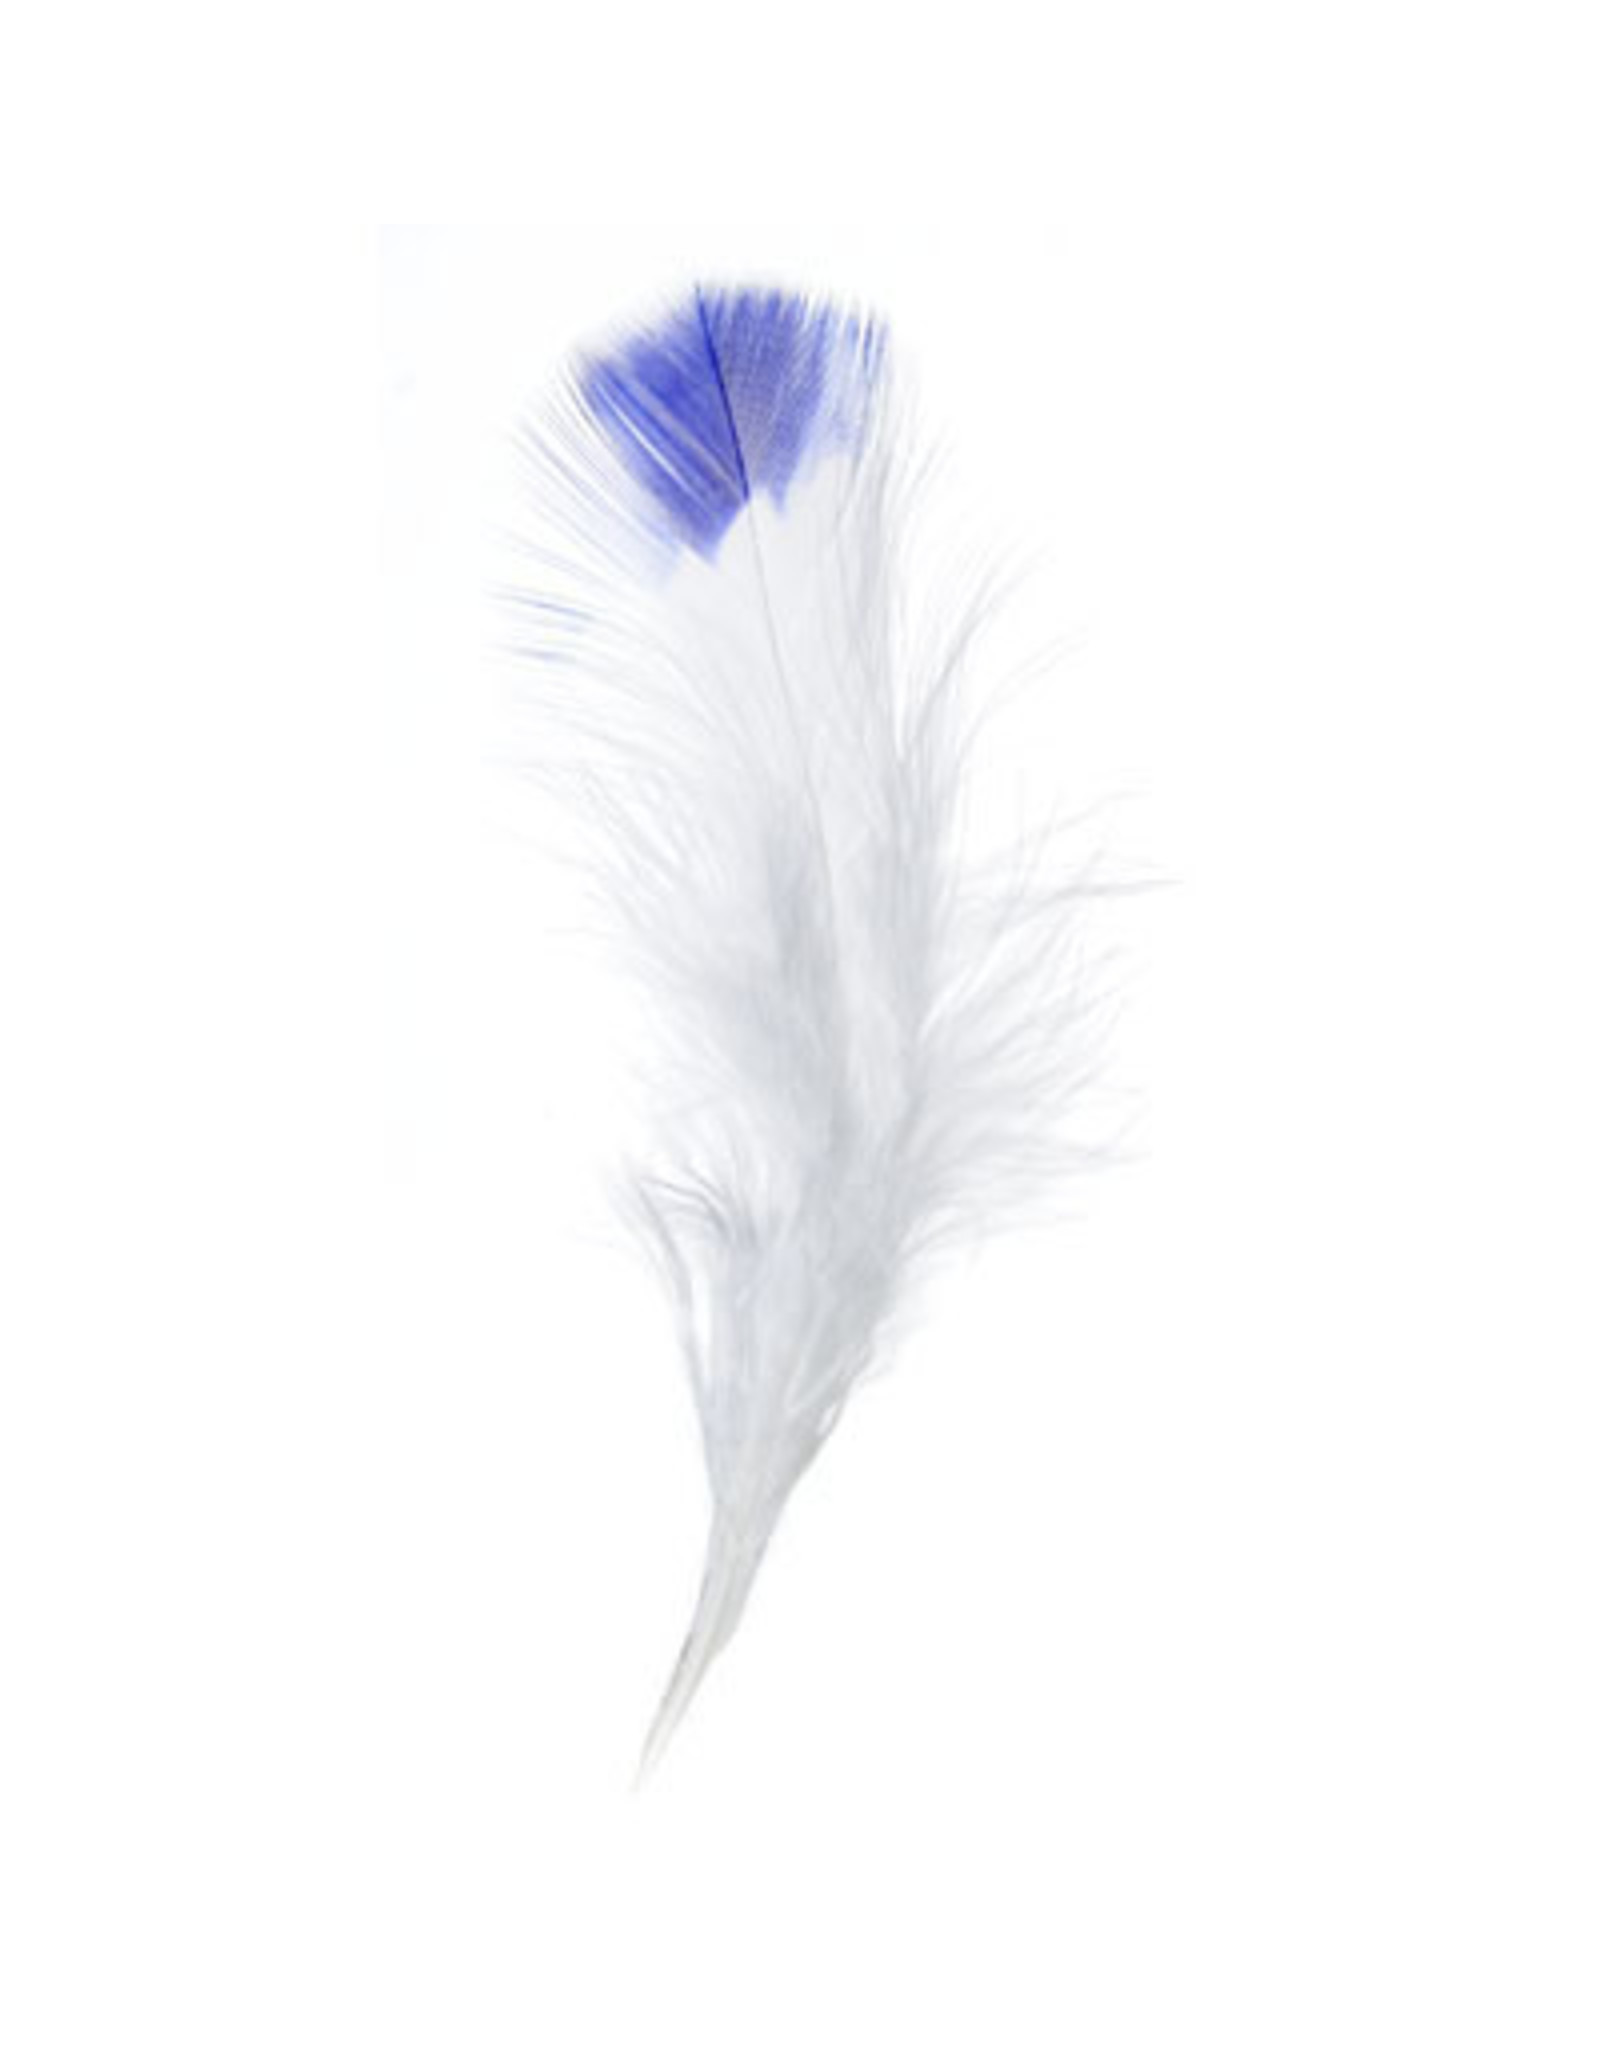 Marabou Feathers 4-6in White Royal Blue Tip  6g